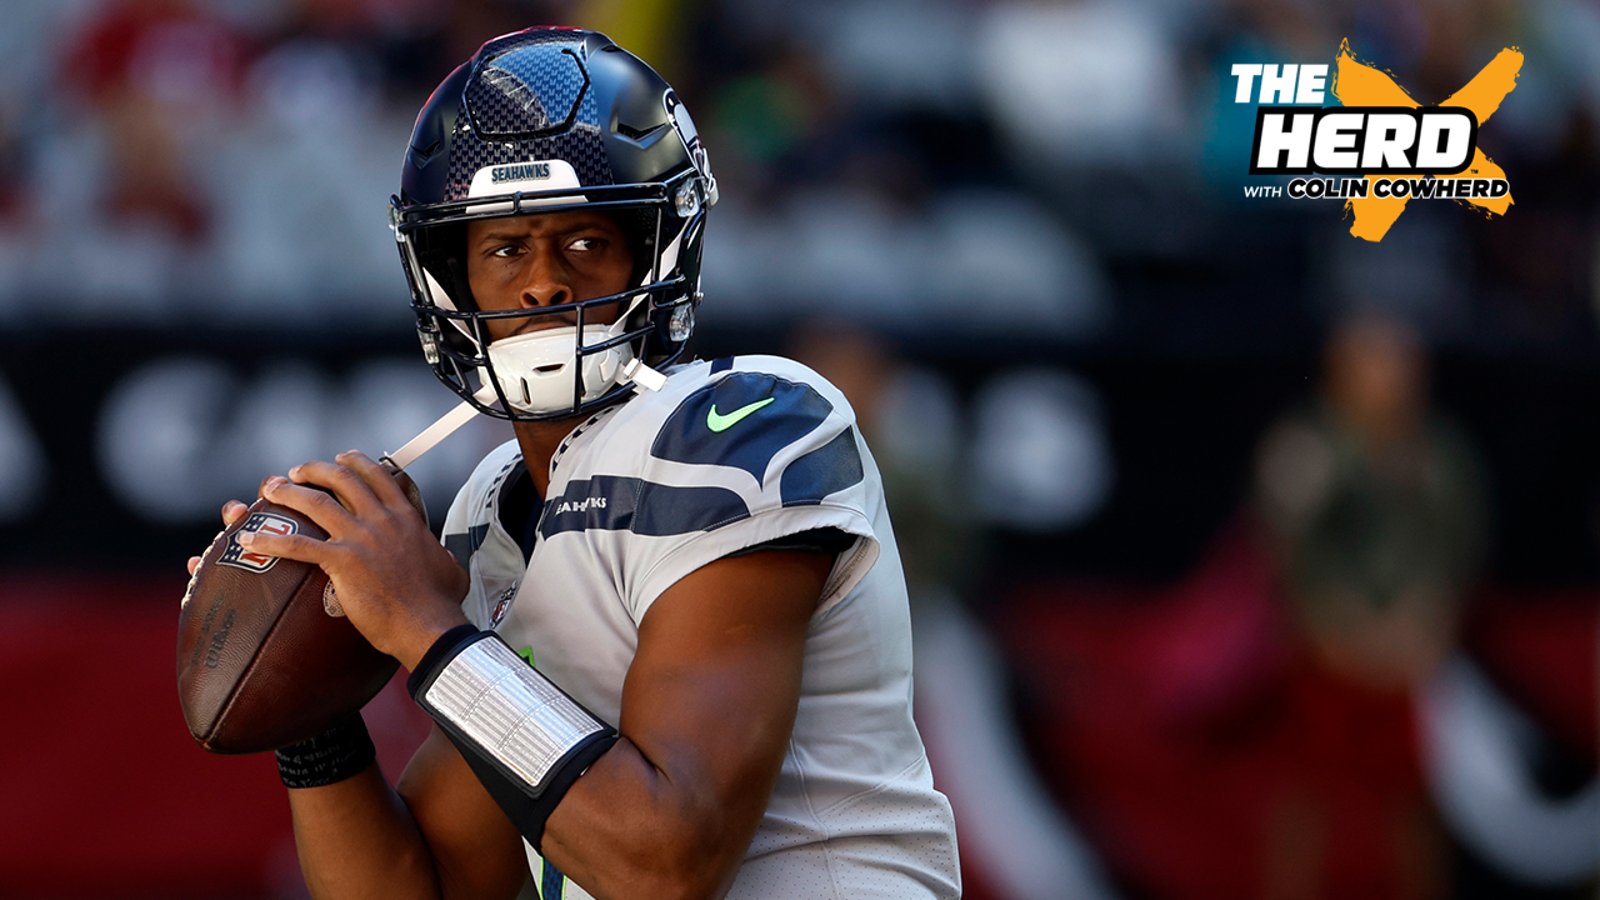 What was the key to Geno Smith, Seahawks success?